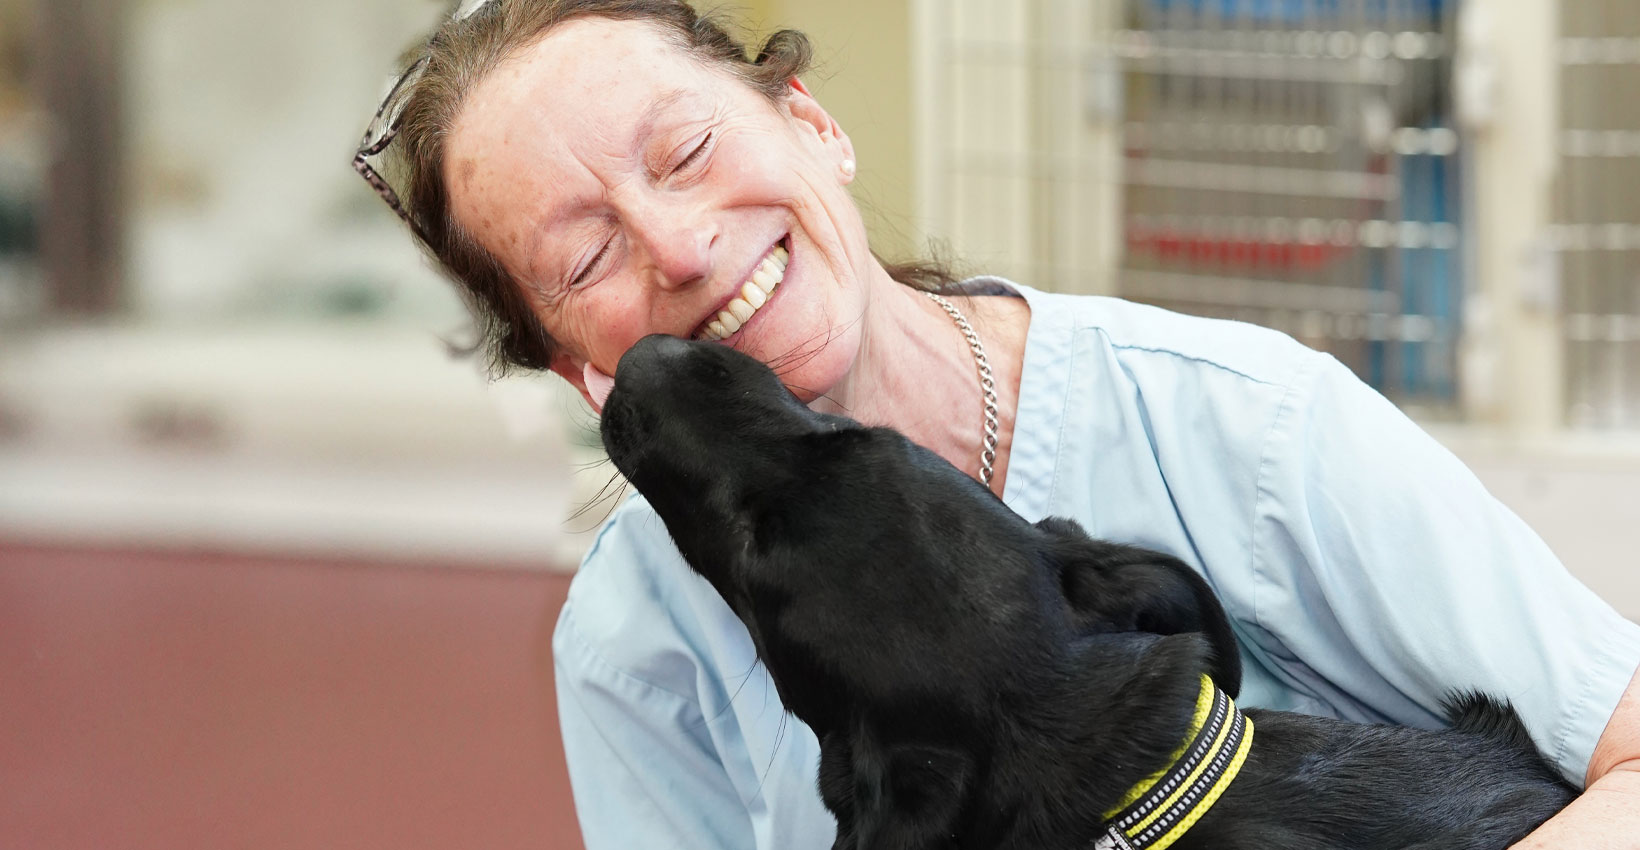 A smiling vet with a black dog nuzzling their face